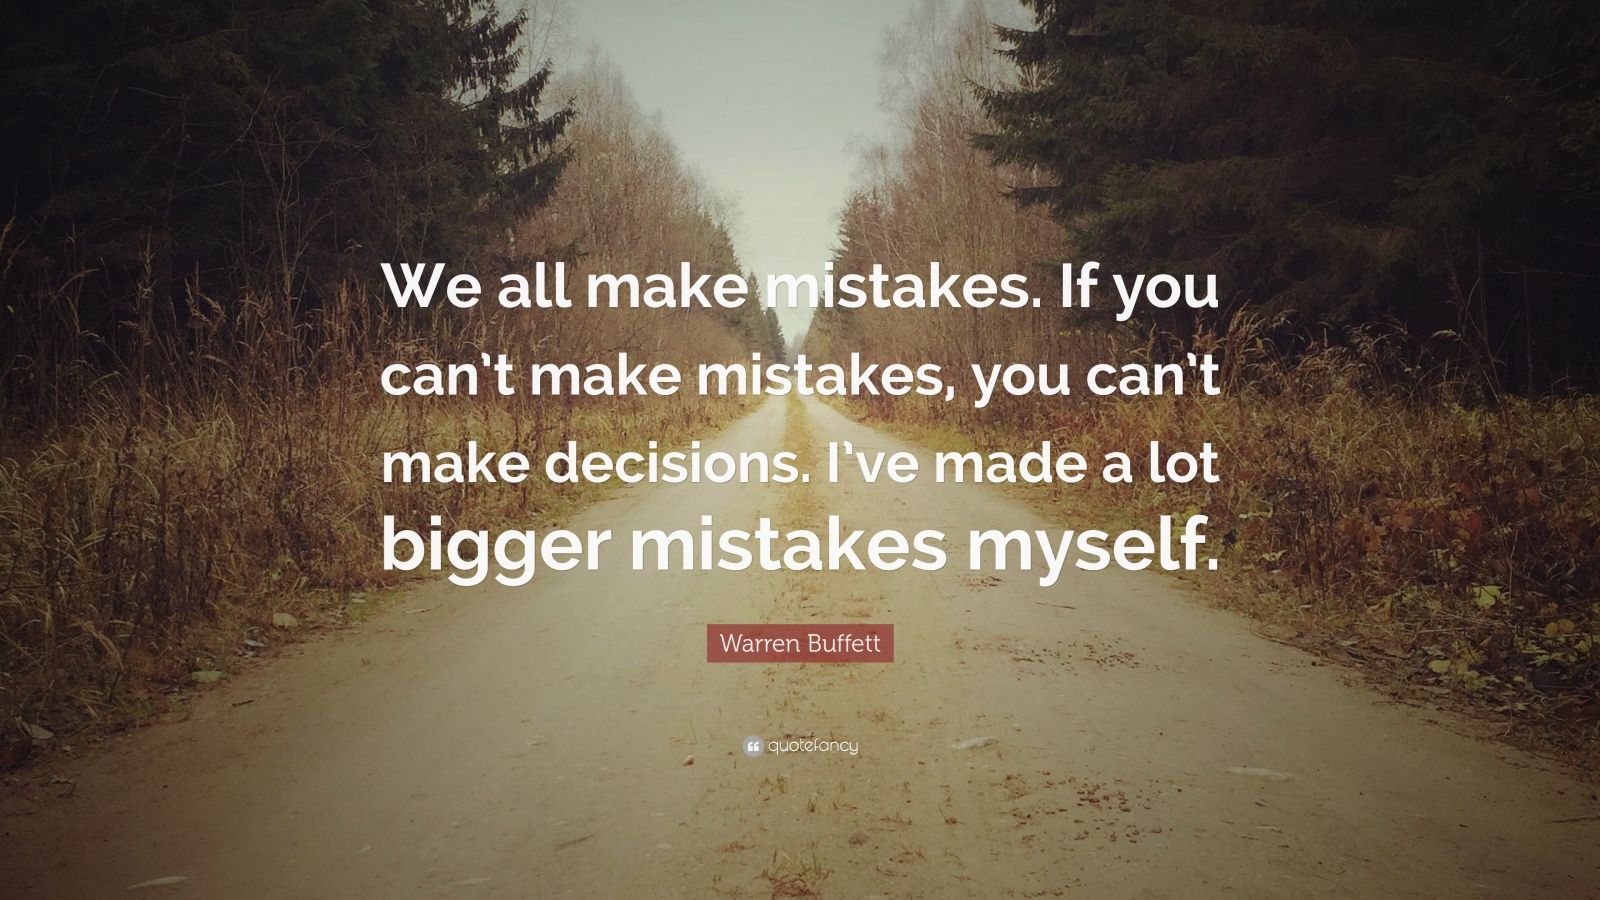 Quotes Making Mistakes - Cocharity